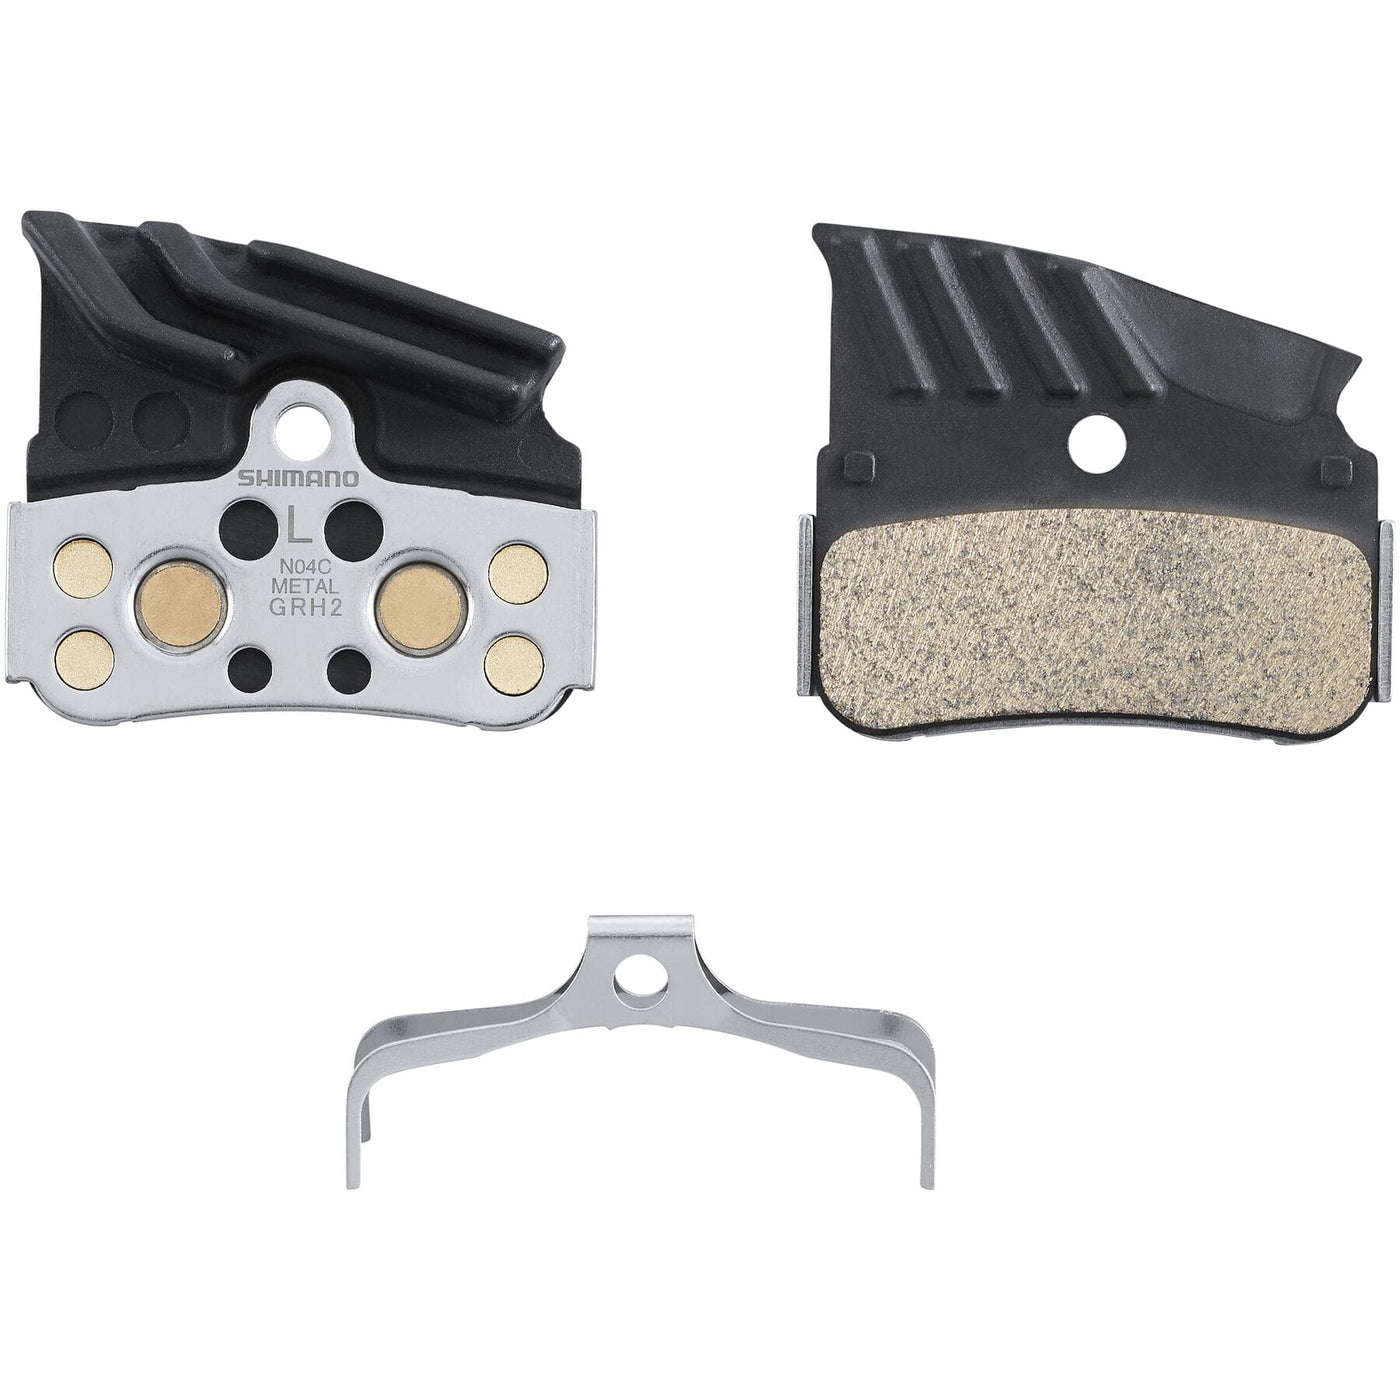 SHIMANO N04C Metal Sintered Disc Brake Pads with Cooling Fins and Spring